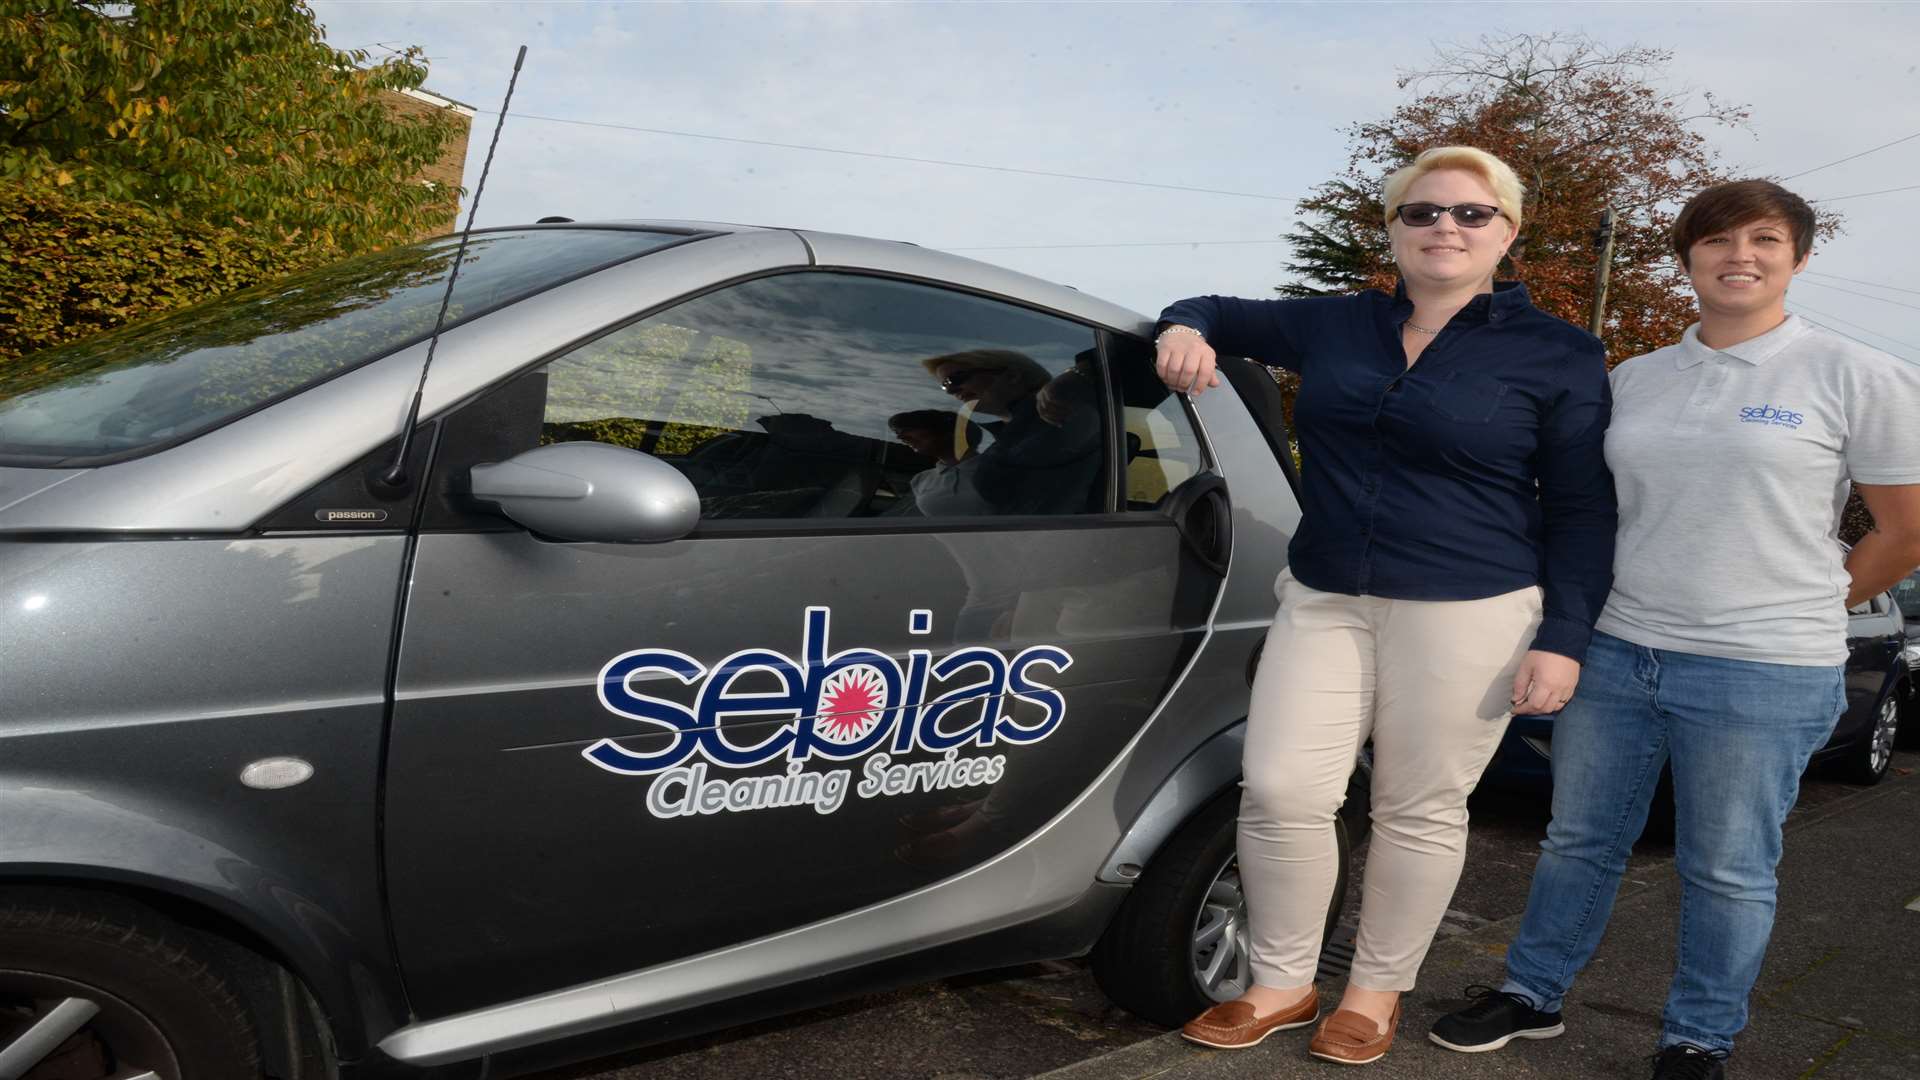 Vicky and Katy Ludlow at Sebias Cleaning Services in White Avenue, Northfleet